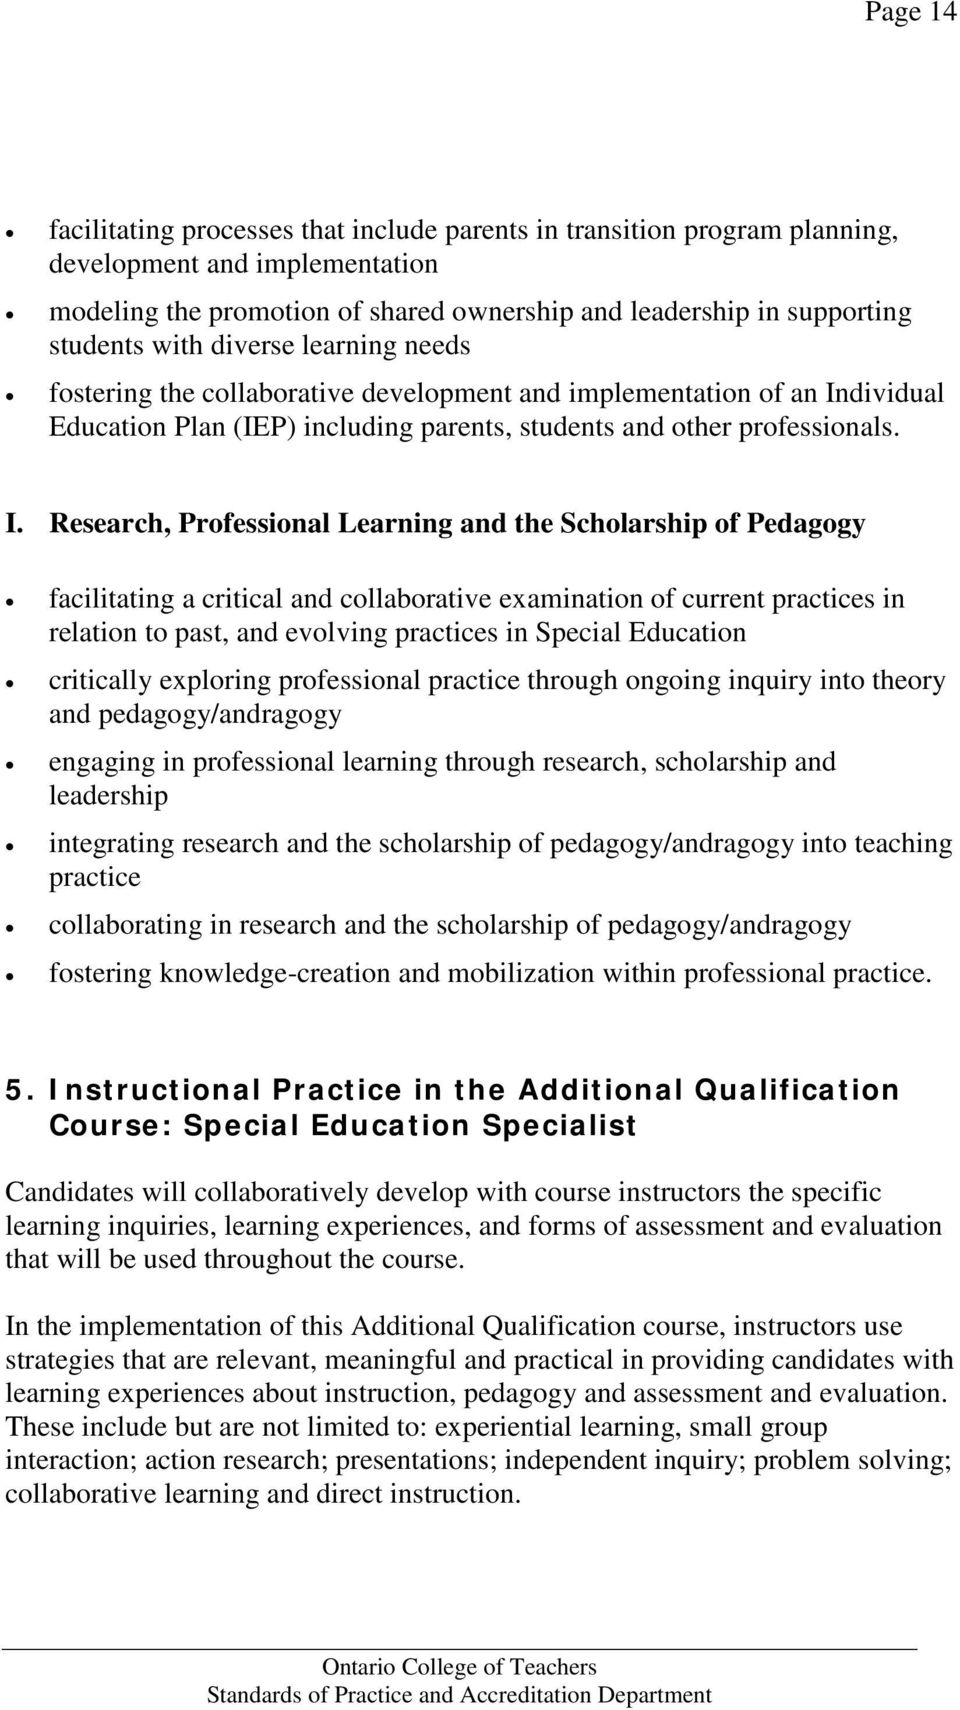 dividual Education Plan (IEP) including parents, students and other professionals. I.